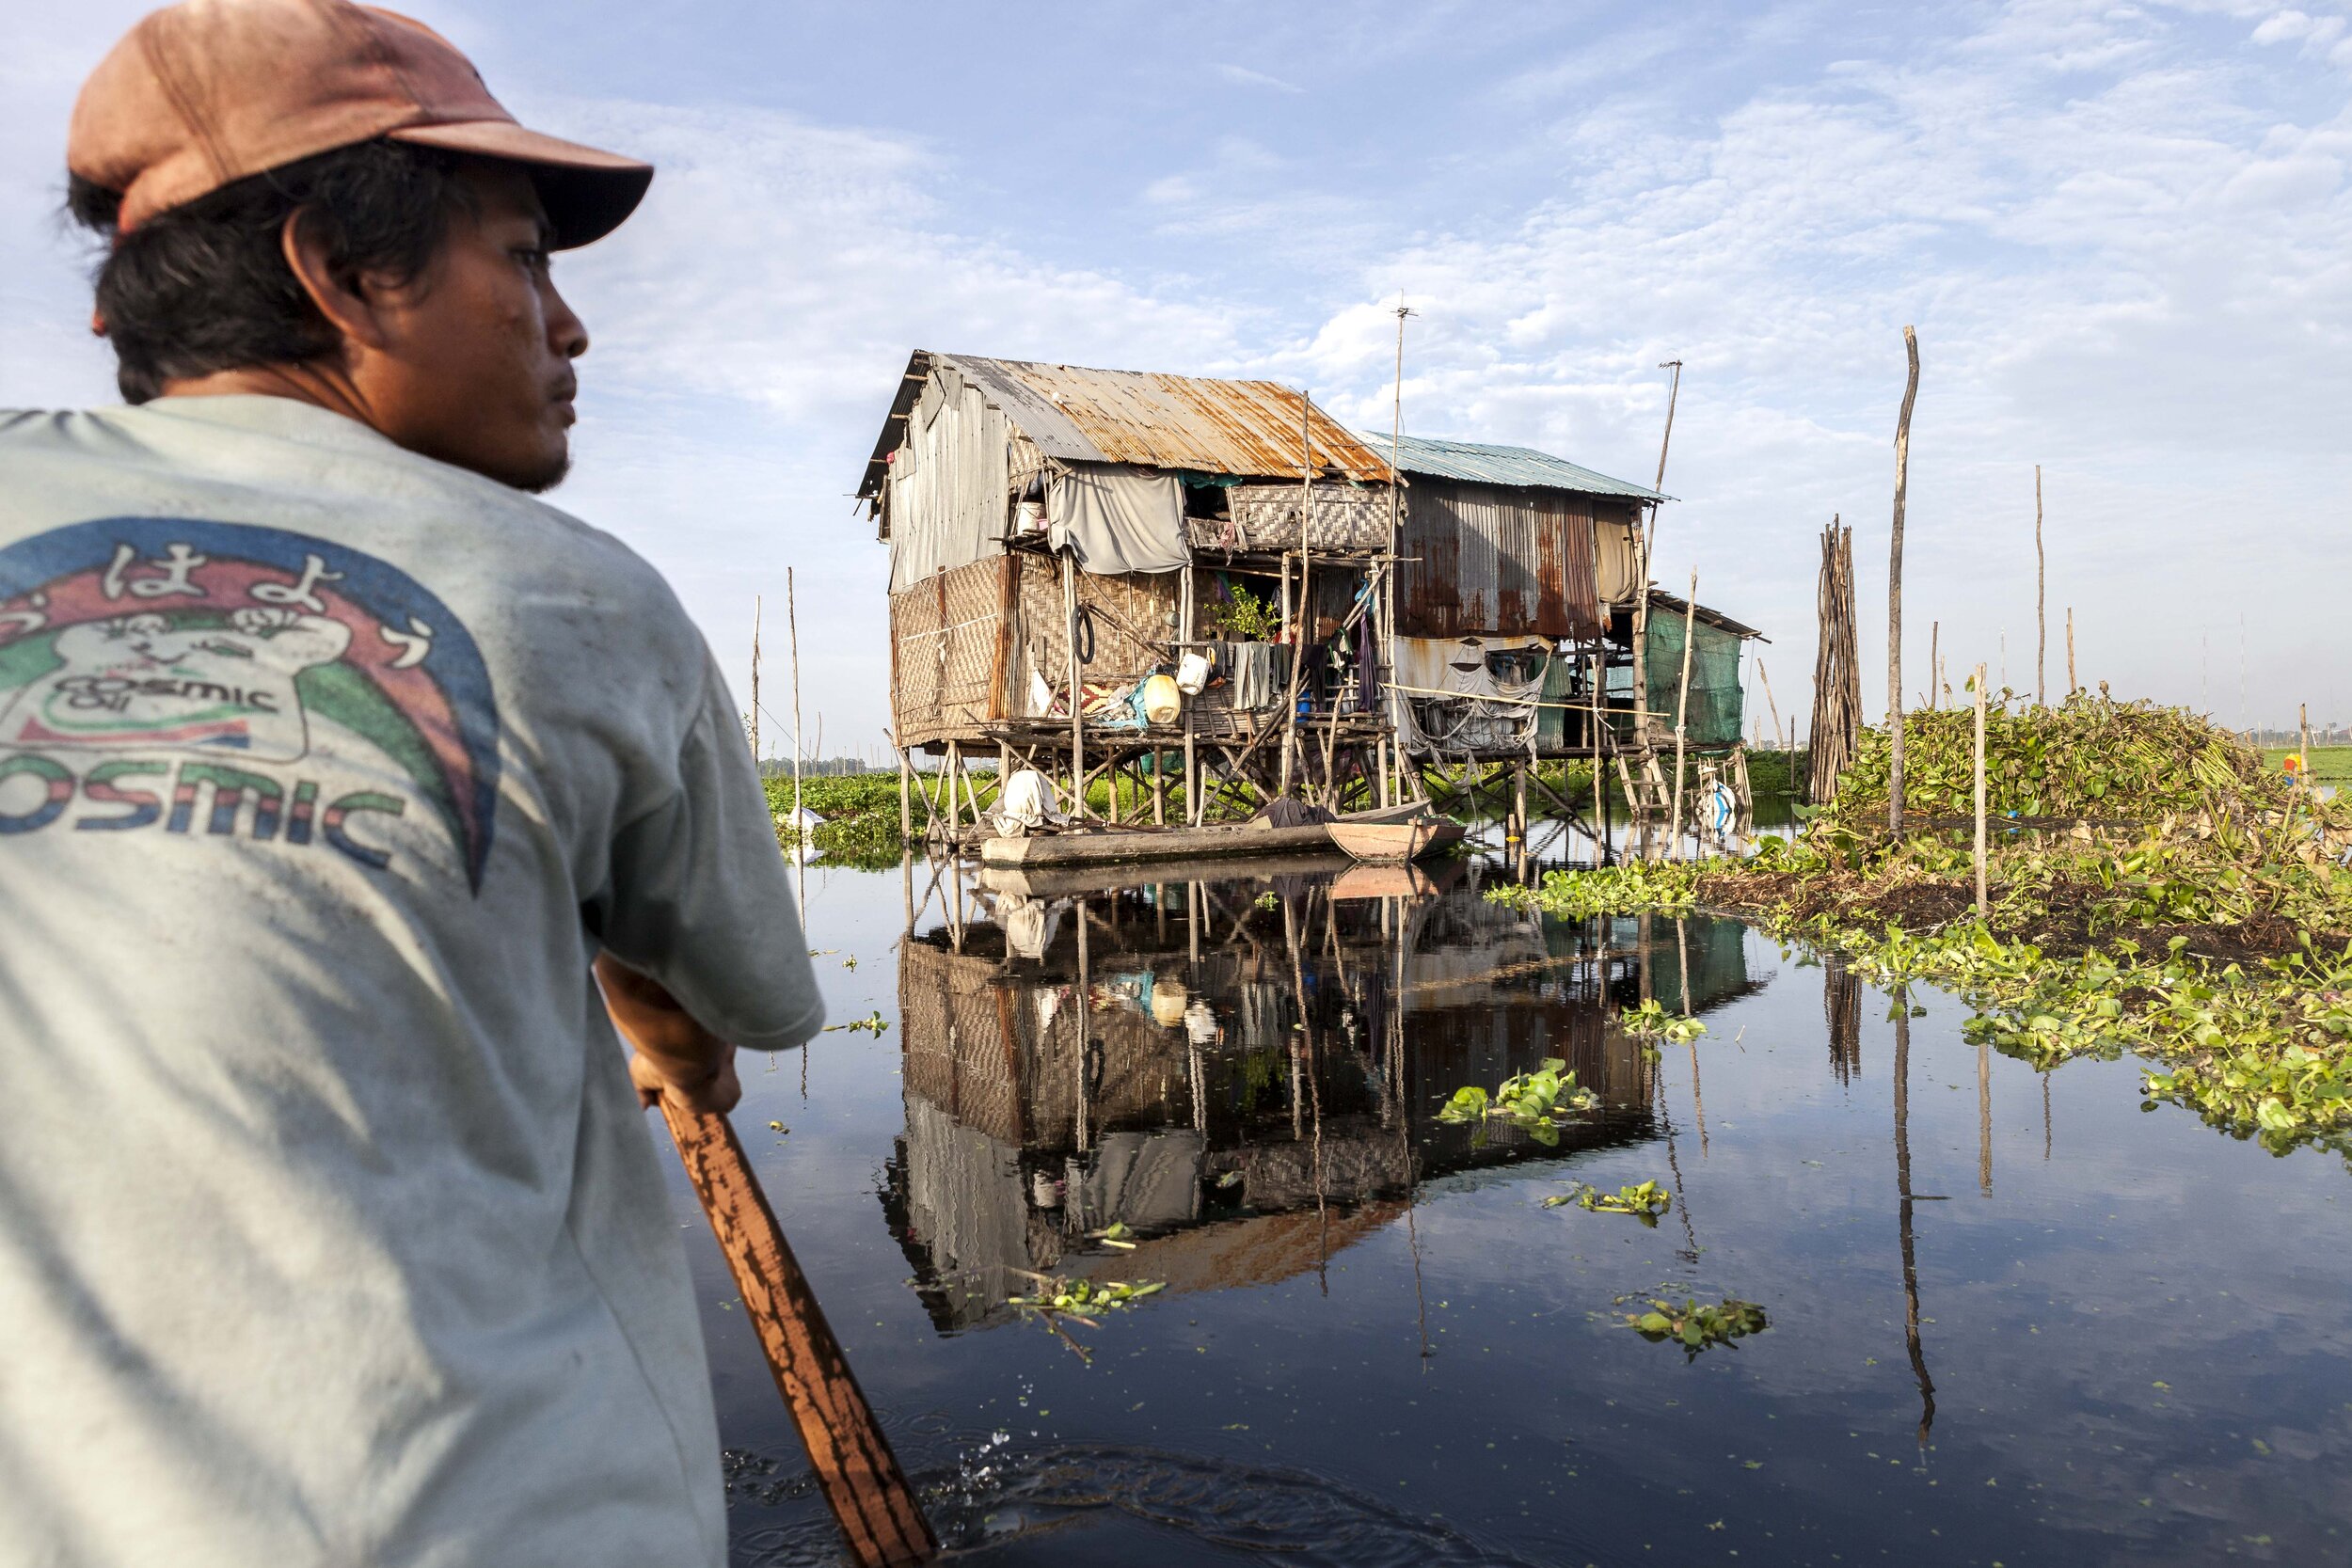  Some residents of Boeng Tompun  live in stilt houses entirely surrounded by the lake water, and commute by canoe to work, school, and markets. 